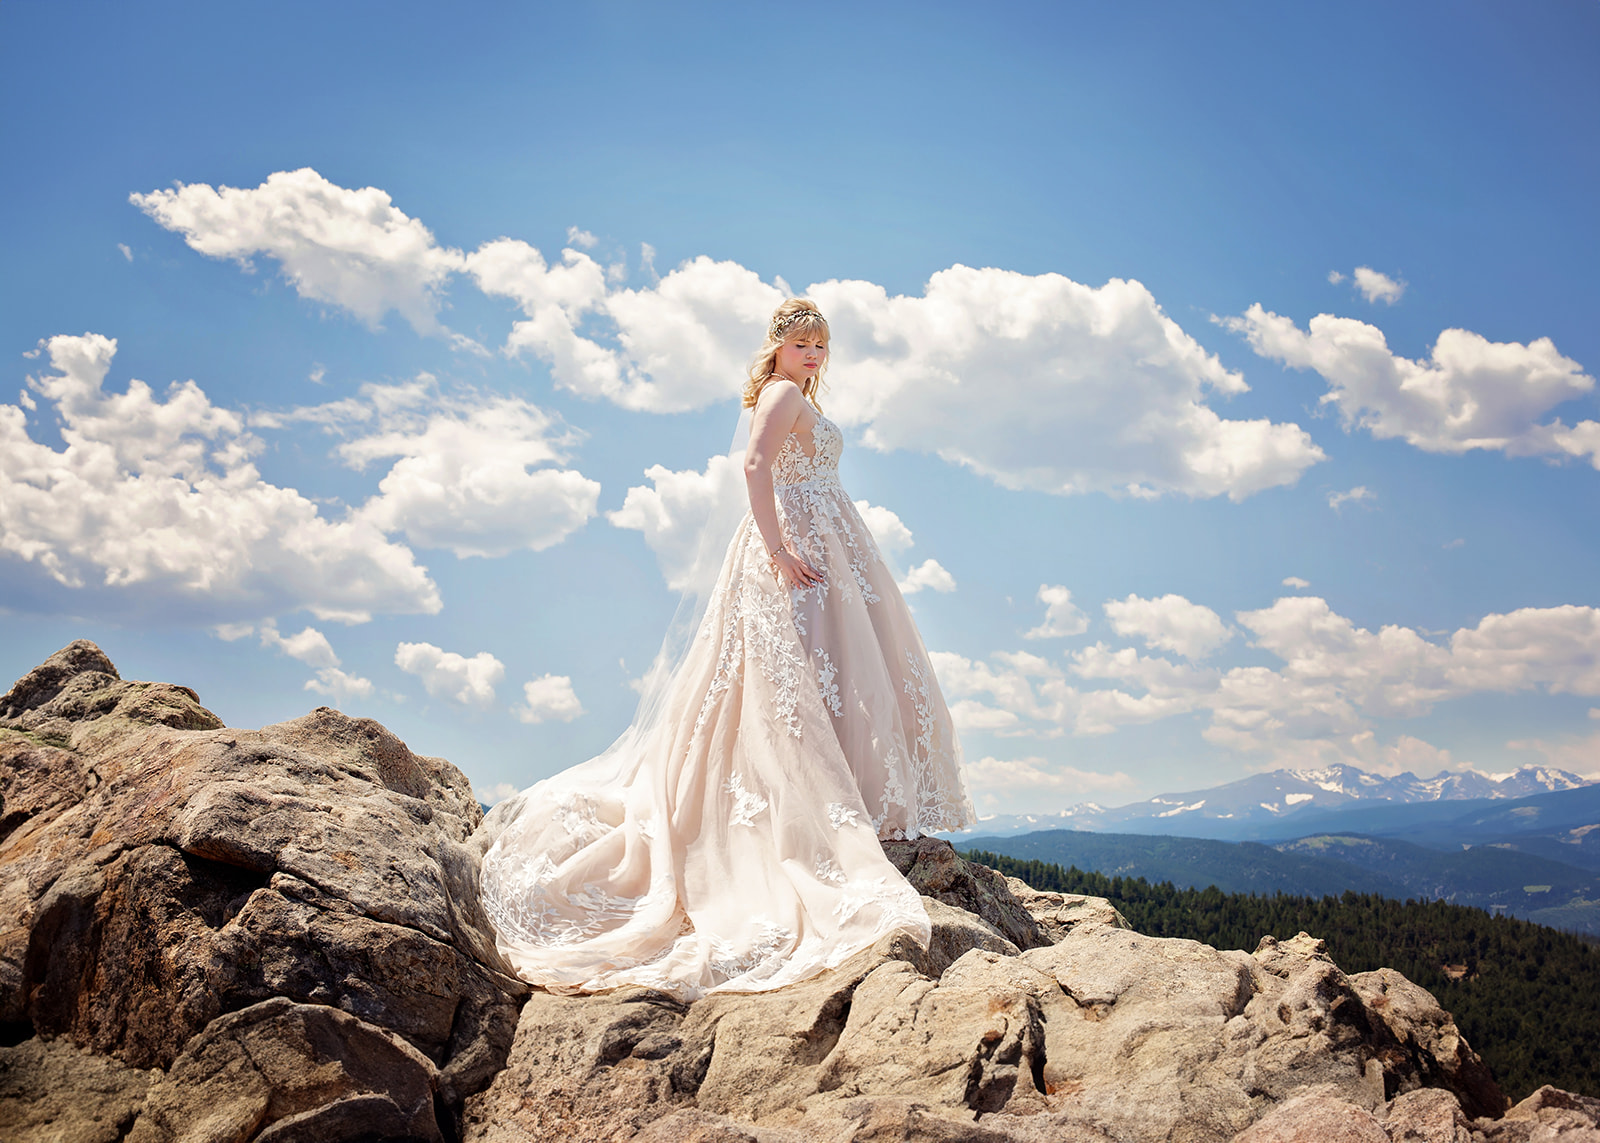 Epic wedding photo at Lost Gulch Overlook in Boulder, CO